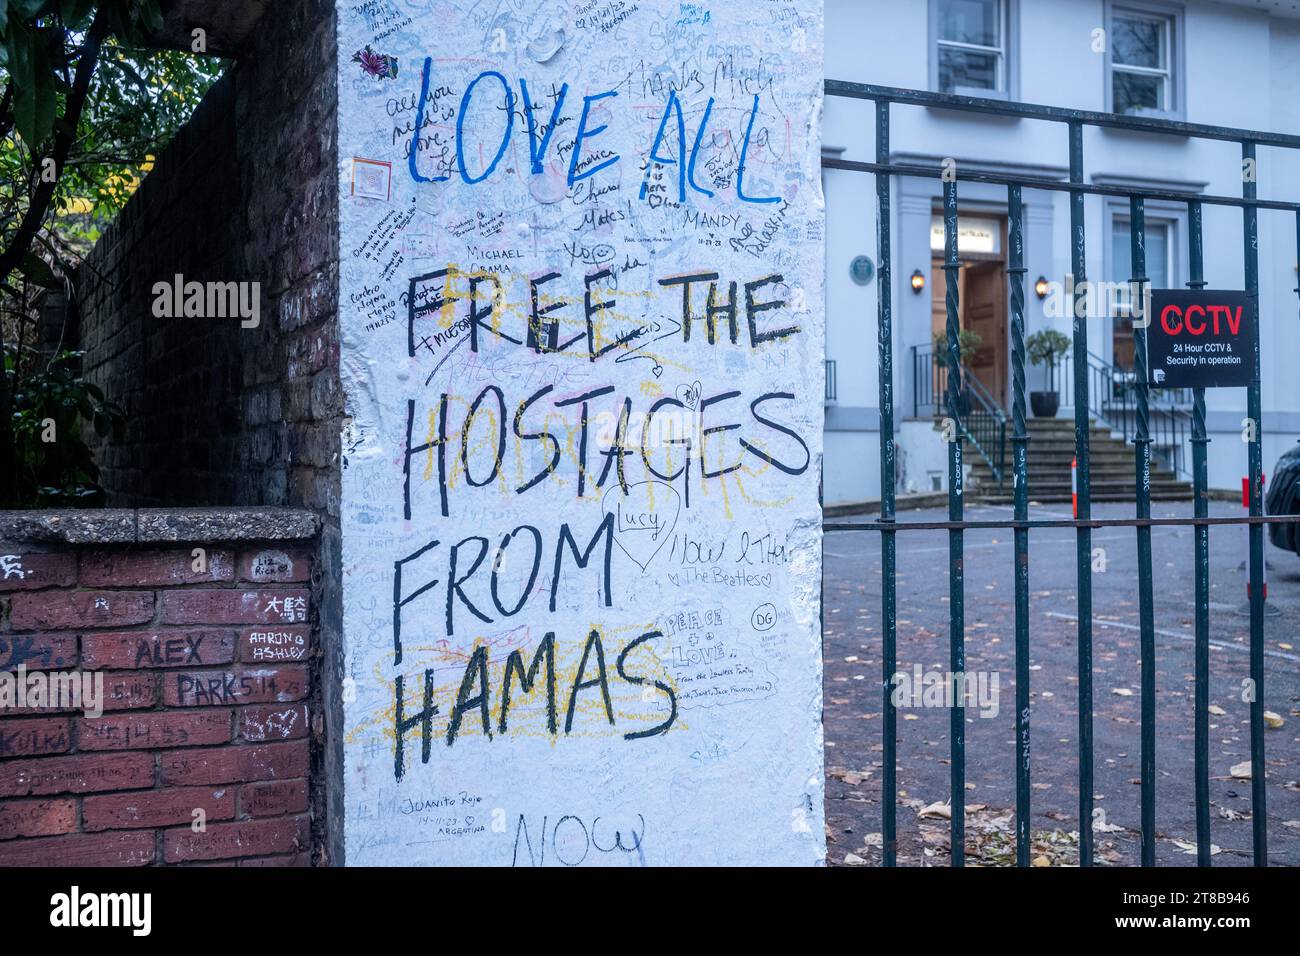 London, Abbey Road StudiosUK 19th November. On the boundary walls of the famous Abbey Road Studios, pro Israel supporters have written “Free the Hostages now” graffiti in the wake of Israeli hostages taken by Hamas on 7th October. Credit: Rena Pearl/Alamy Live News Stock Photo